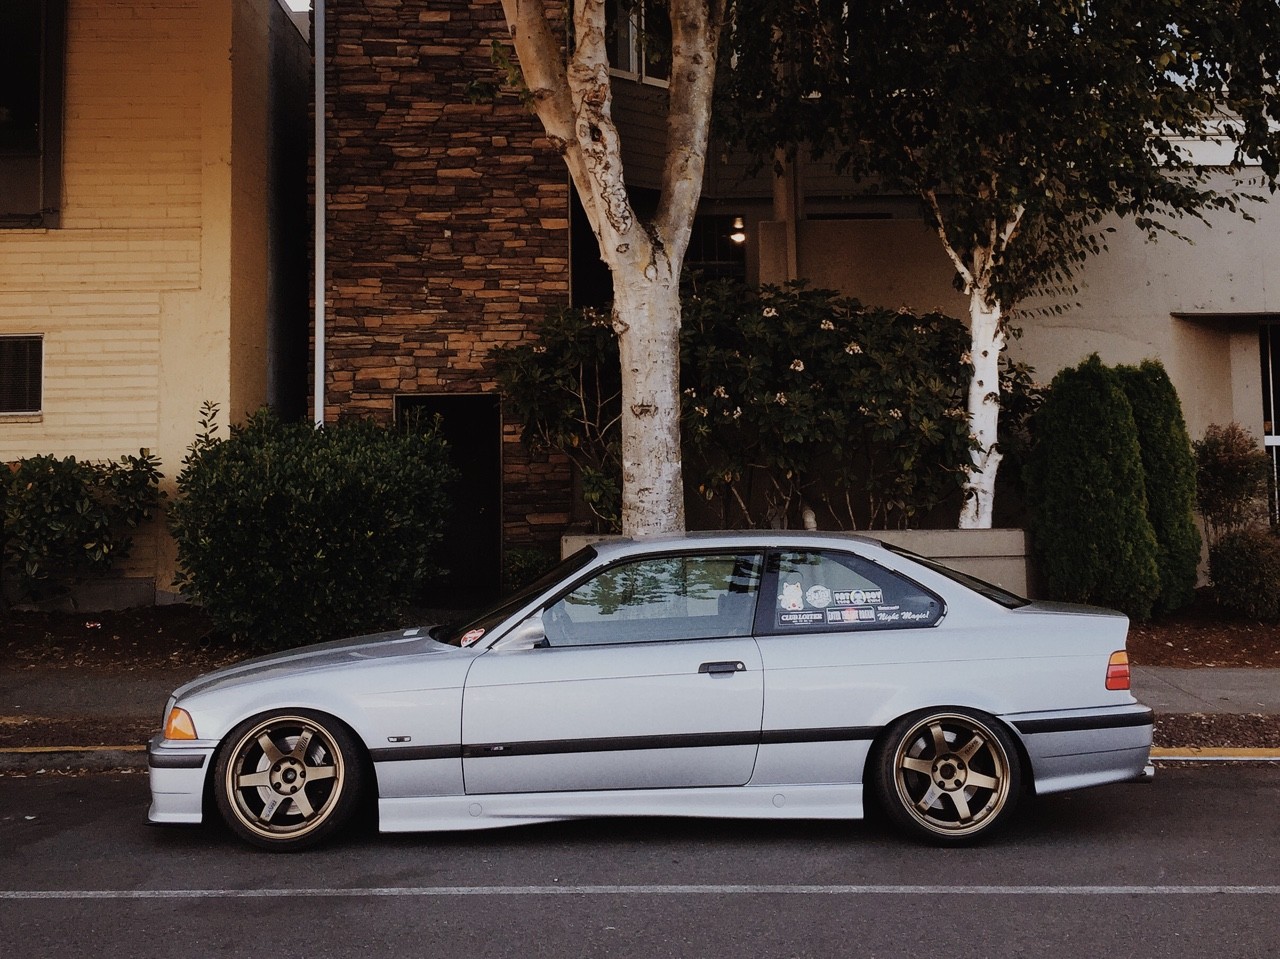 car, BMW E36, Stance, Lowered, Tuning, Trees, Bushes, House, BMW, VOLK RACING, German Cars Wallpaper